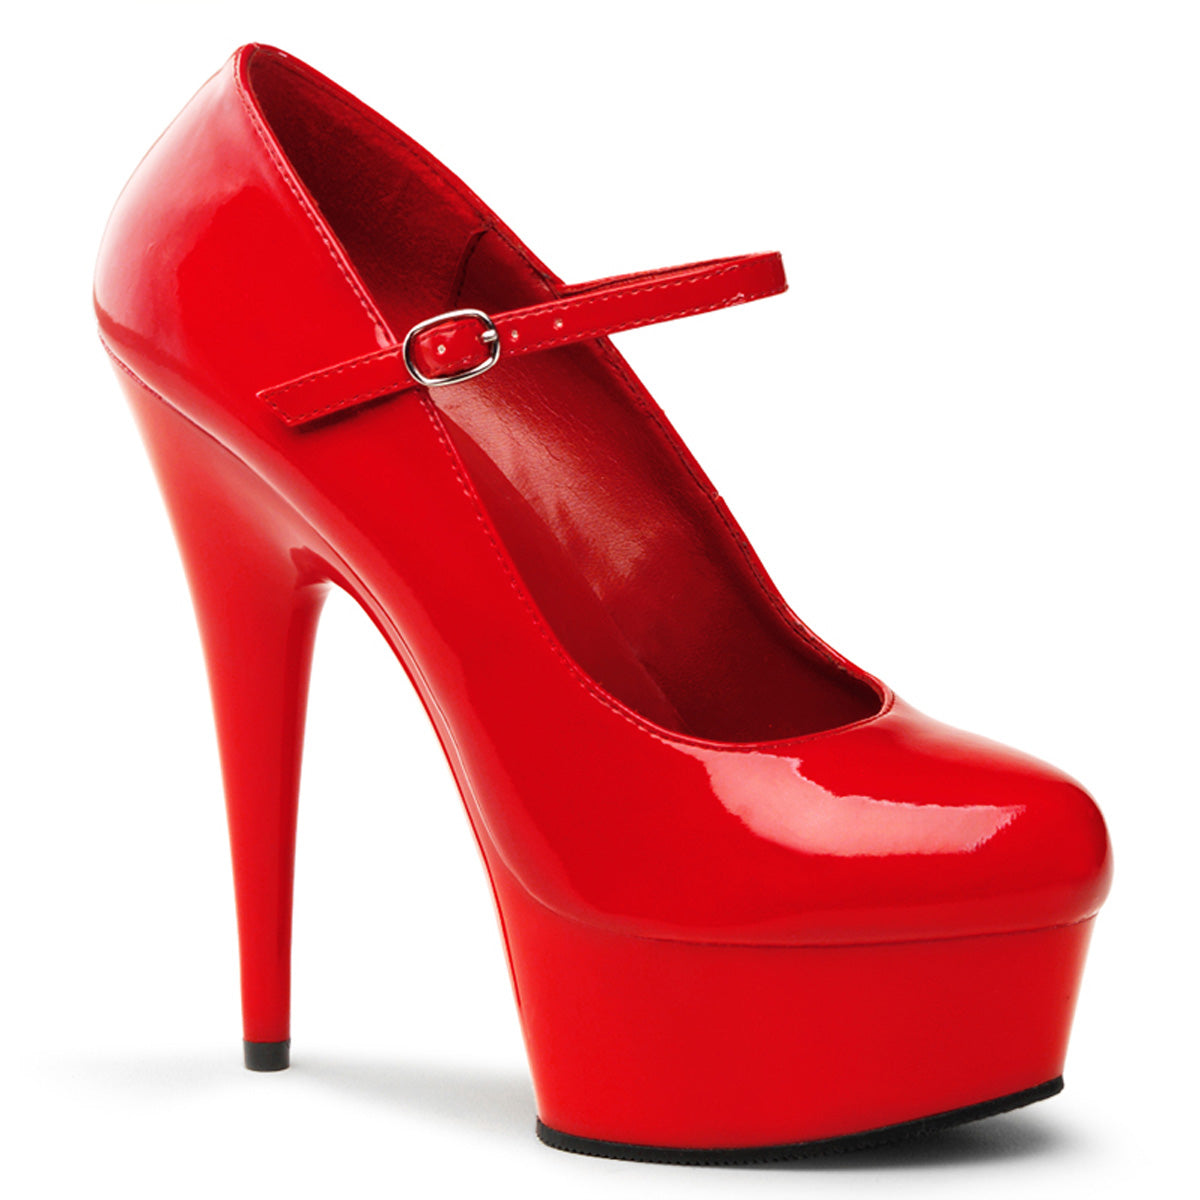 DELIGHT-687 Pleaser 6 Inch Heel Red Pole Dancing Platforms-Pleaser- Sexy Shoes